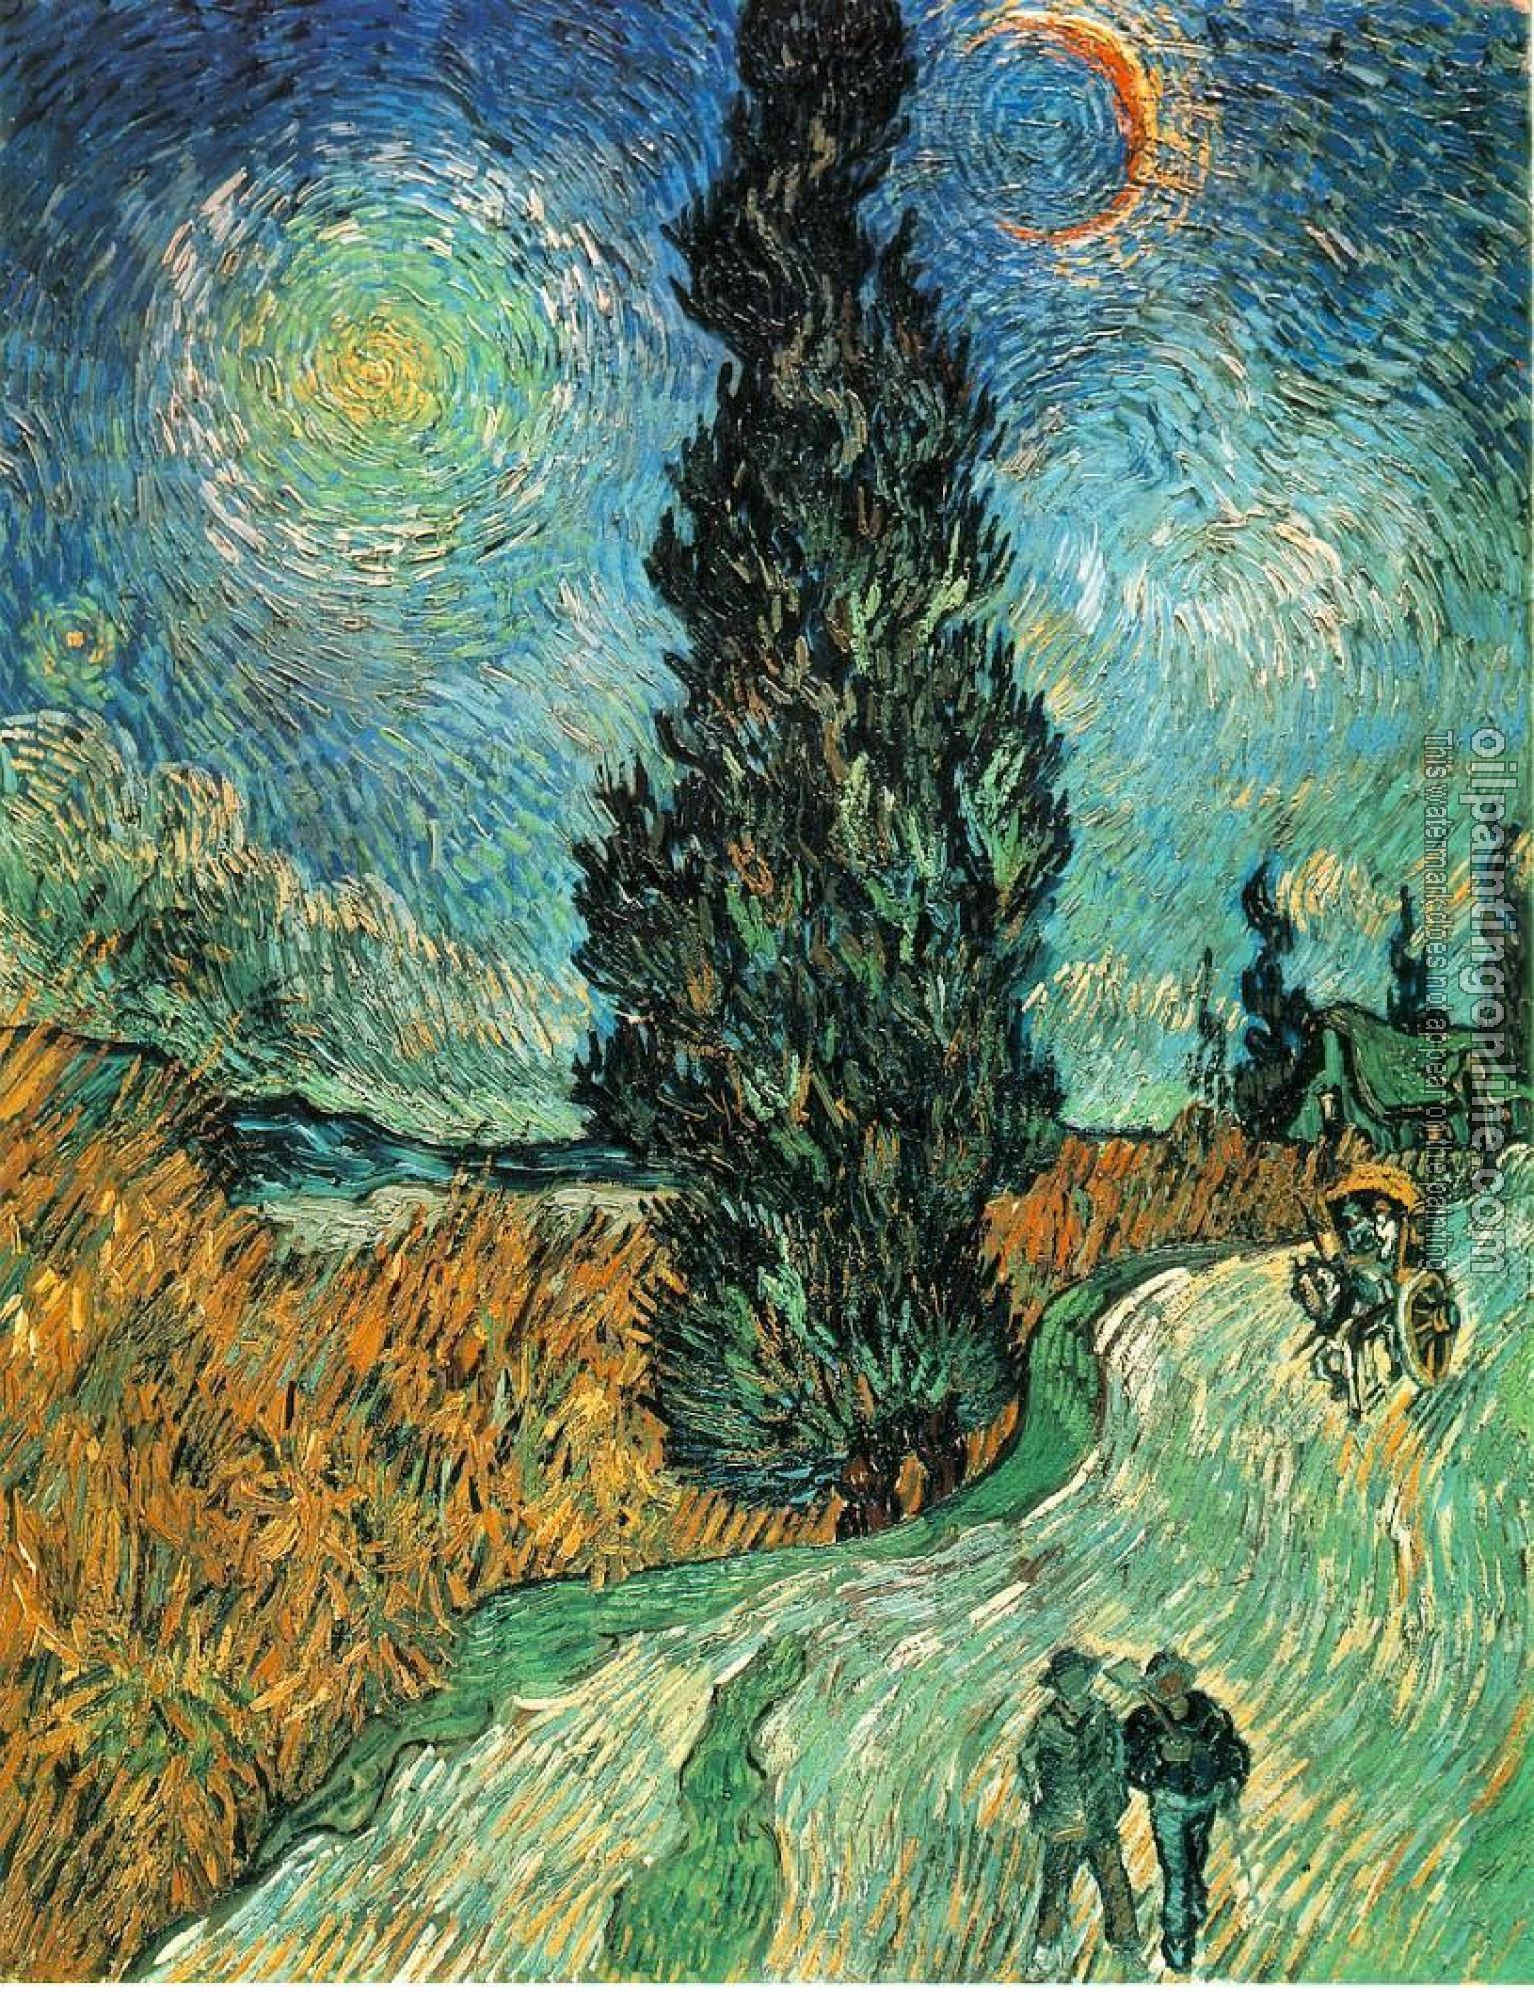 Gogh, Vincent van - Road with Cypress and Star